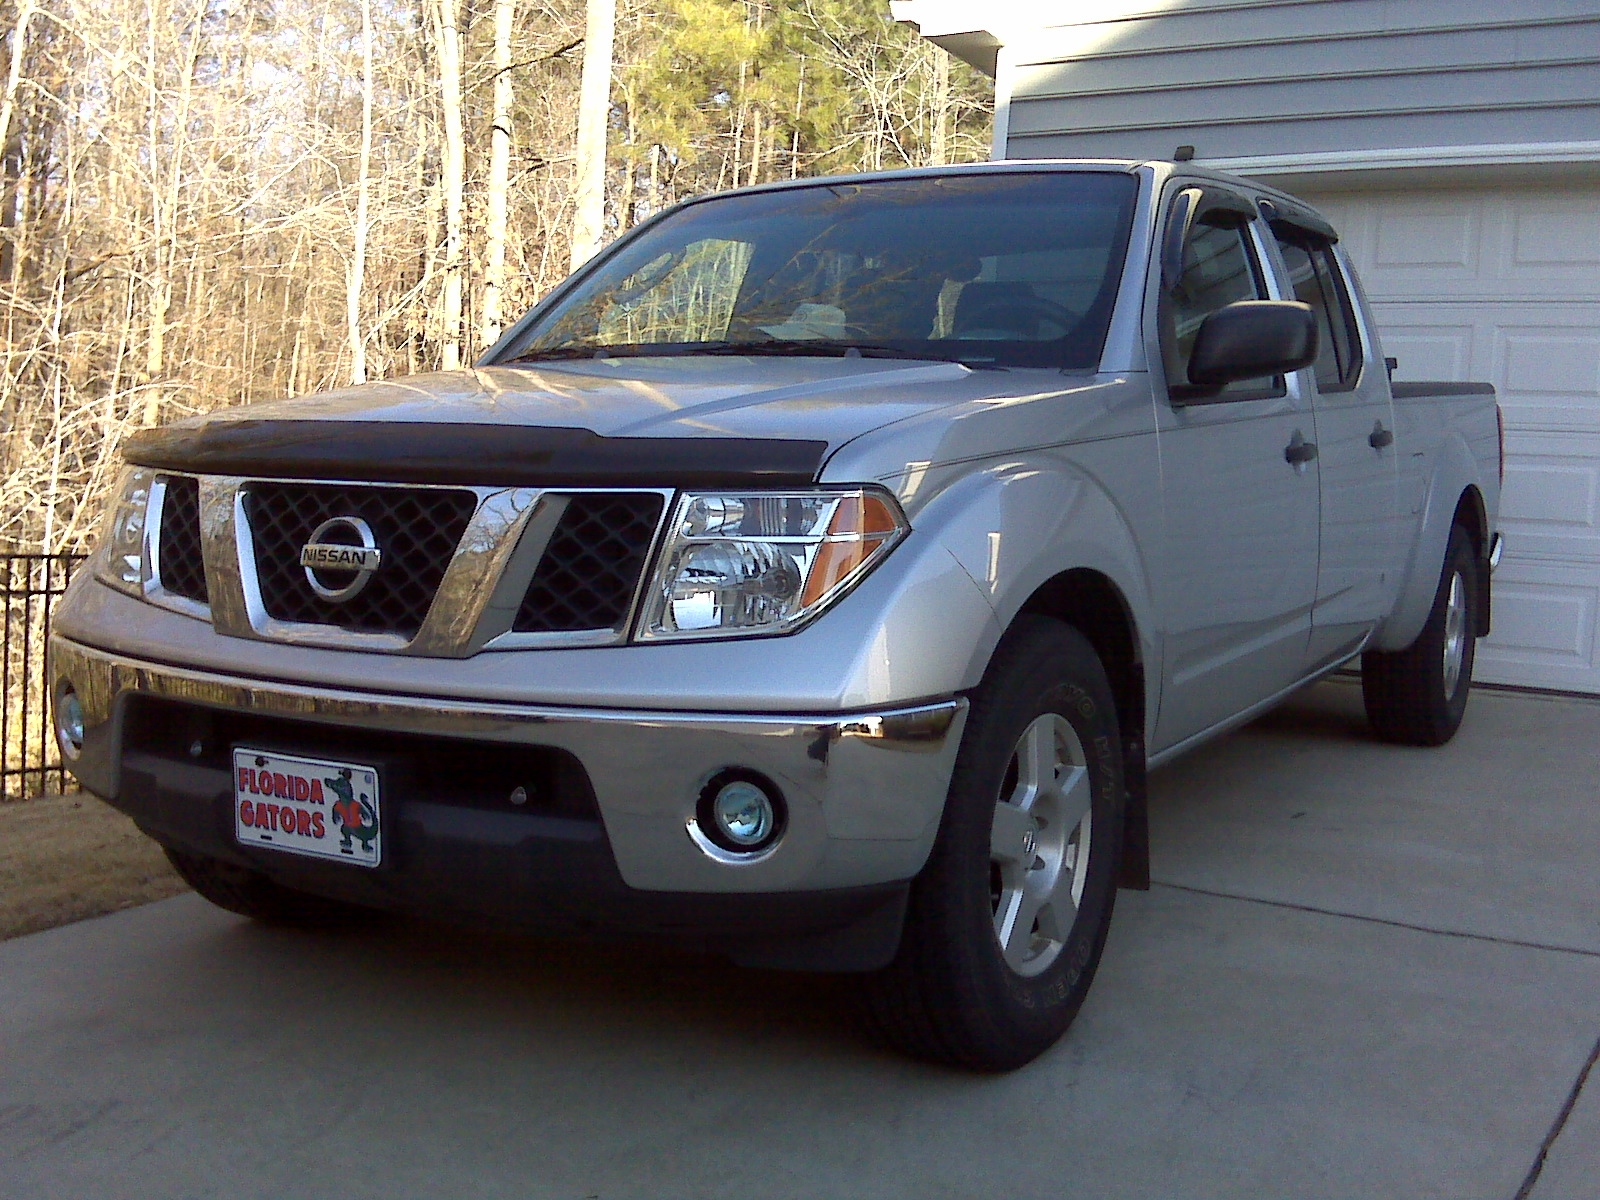 2009 Nissan frontier crew cab review #4